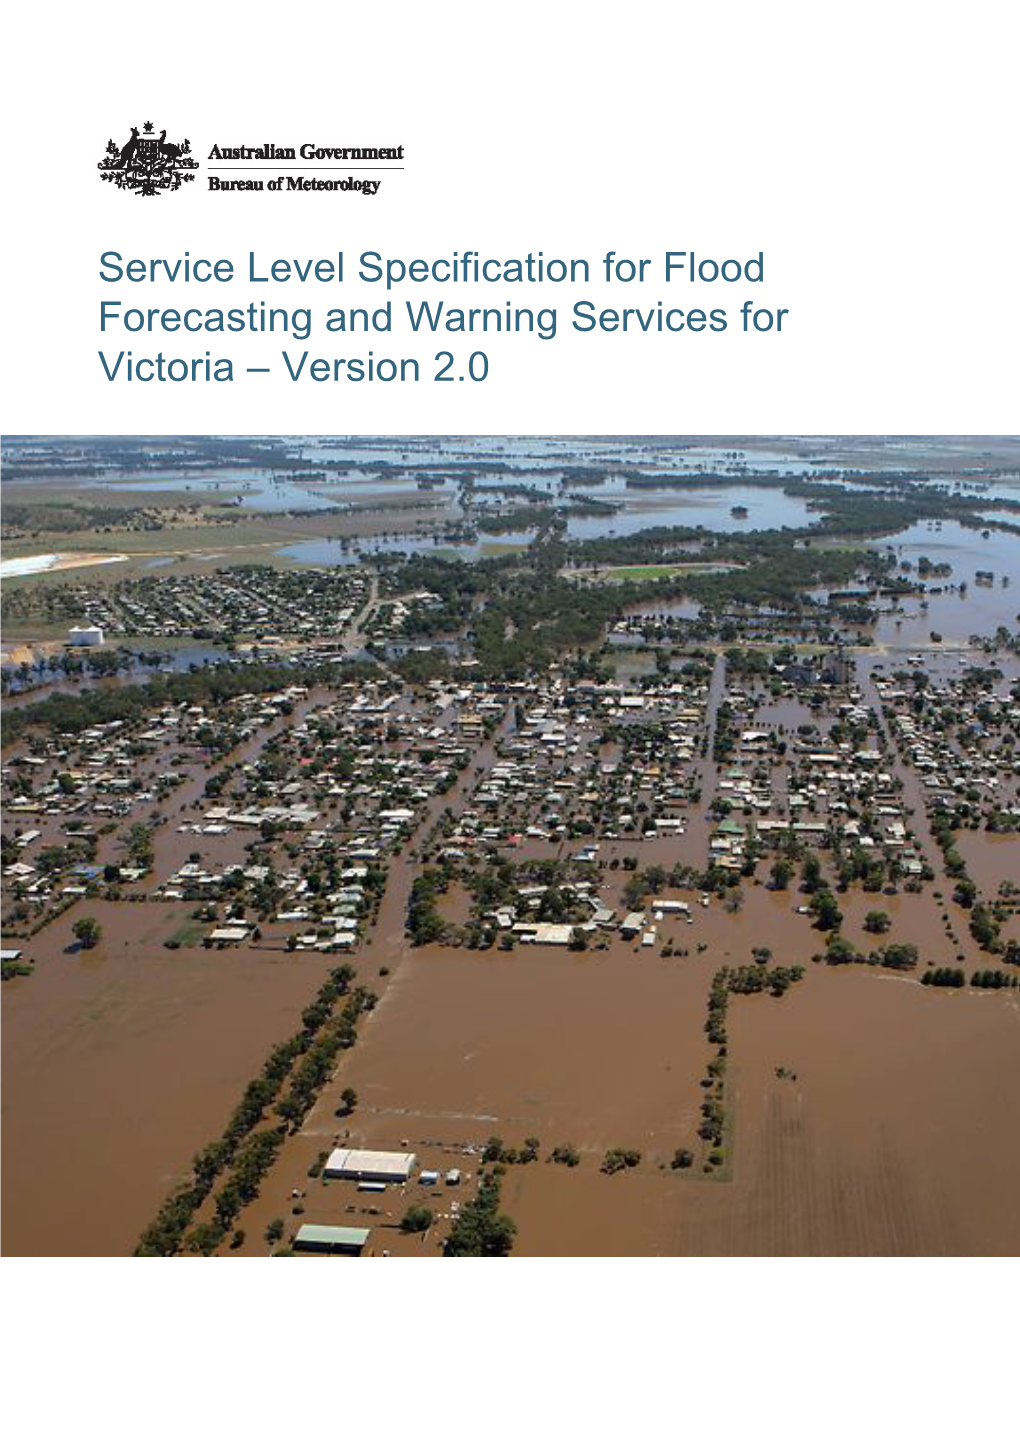 VIC Service Level Specification